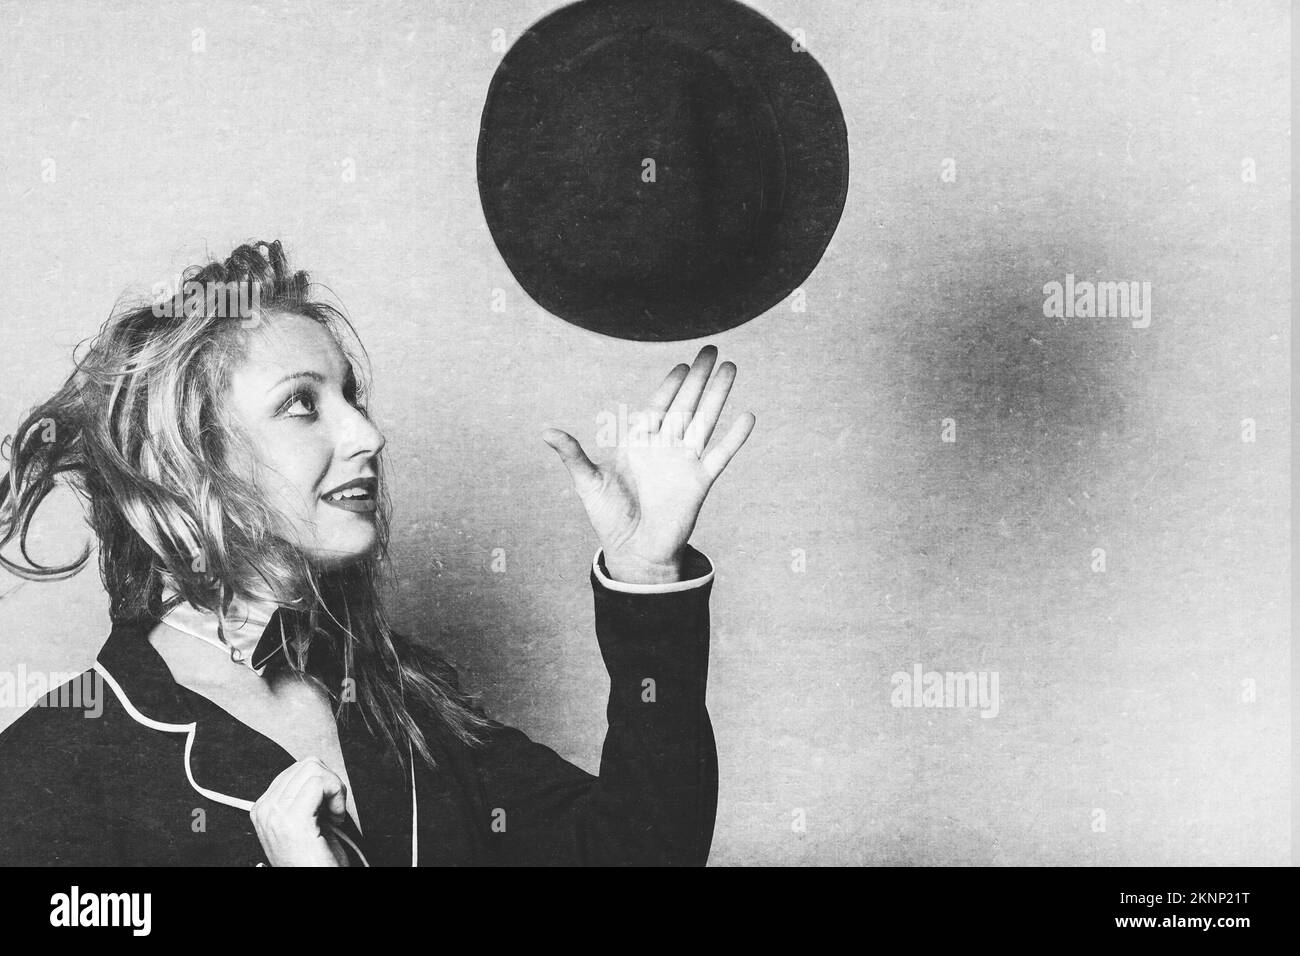 Aged photograph of an elegant blond retro woman throwing and catching hat with hair in motion Stock Photo